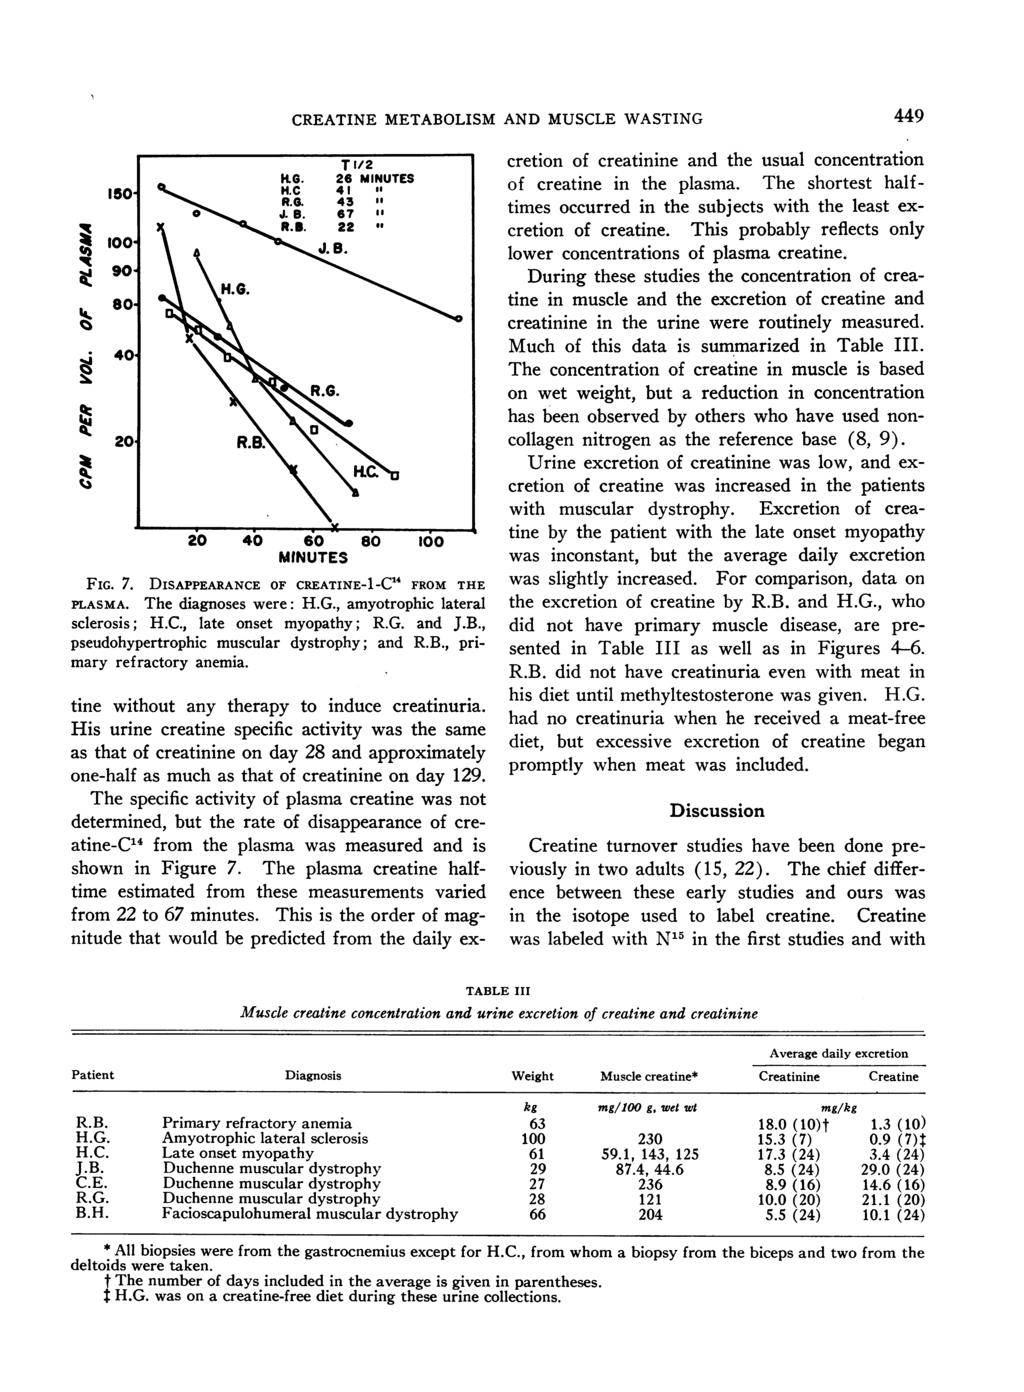 CREATINE METABOLISM AND MUSCLE WASTING 449 100 190 %J40 N.G. 20 RA.B R R G. 20 40 60 80 100 MINUTES FIG. 7. DISAPPEARANCE OF CREATINE-1-C1 FROM THE PLASMA. The diagnoses were: H.G., amyotrophic lateral sclerosis; H.